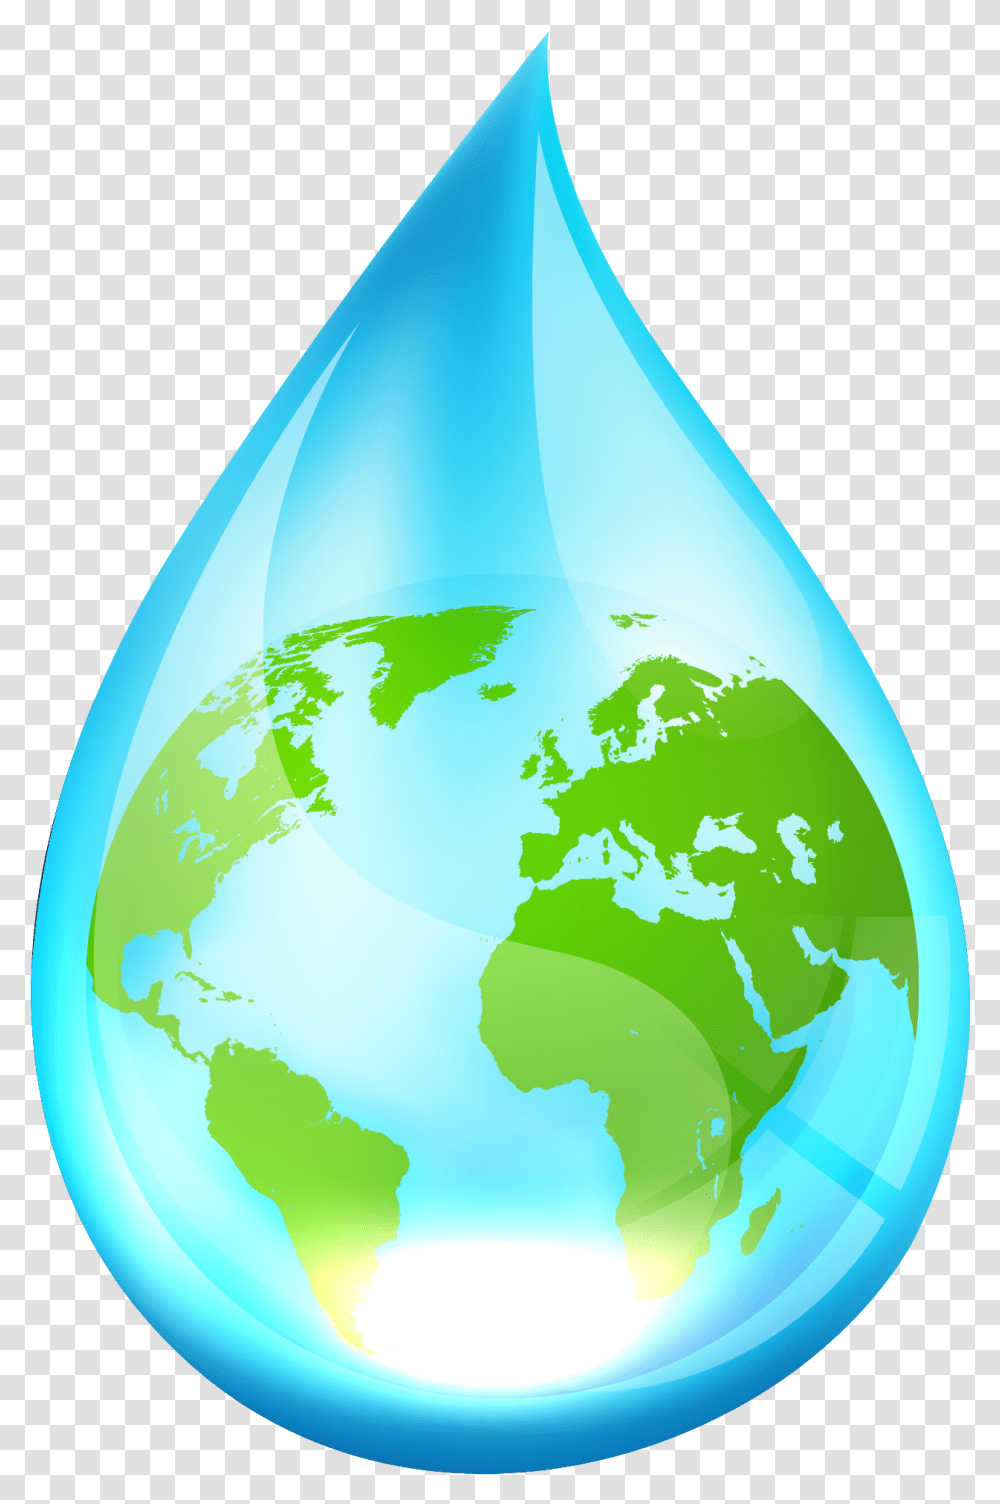 Download Earth Water Droplet With World Full Size World Map Wallpaper For Phone, Astronomy, Outer Space, Universe, Planet Transparent Png